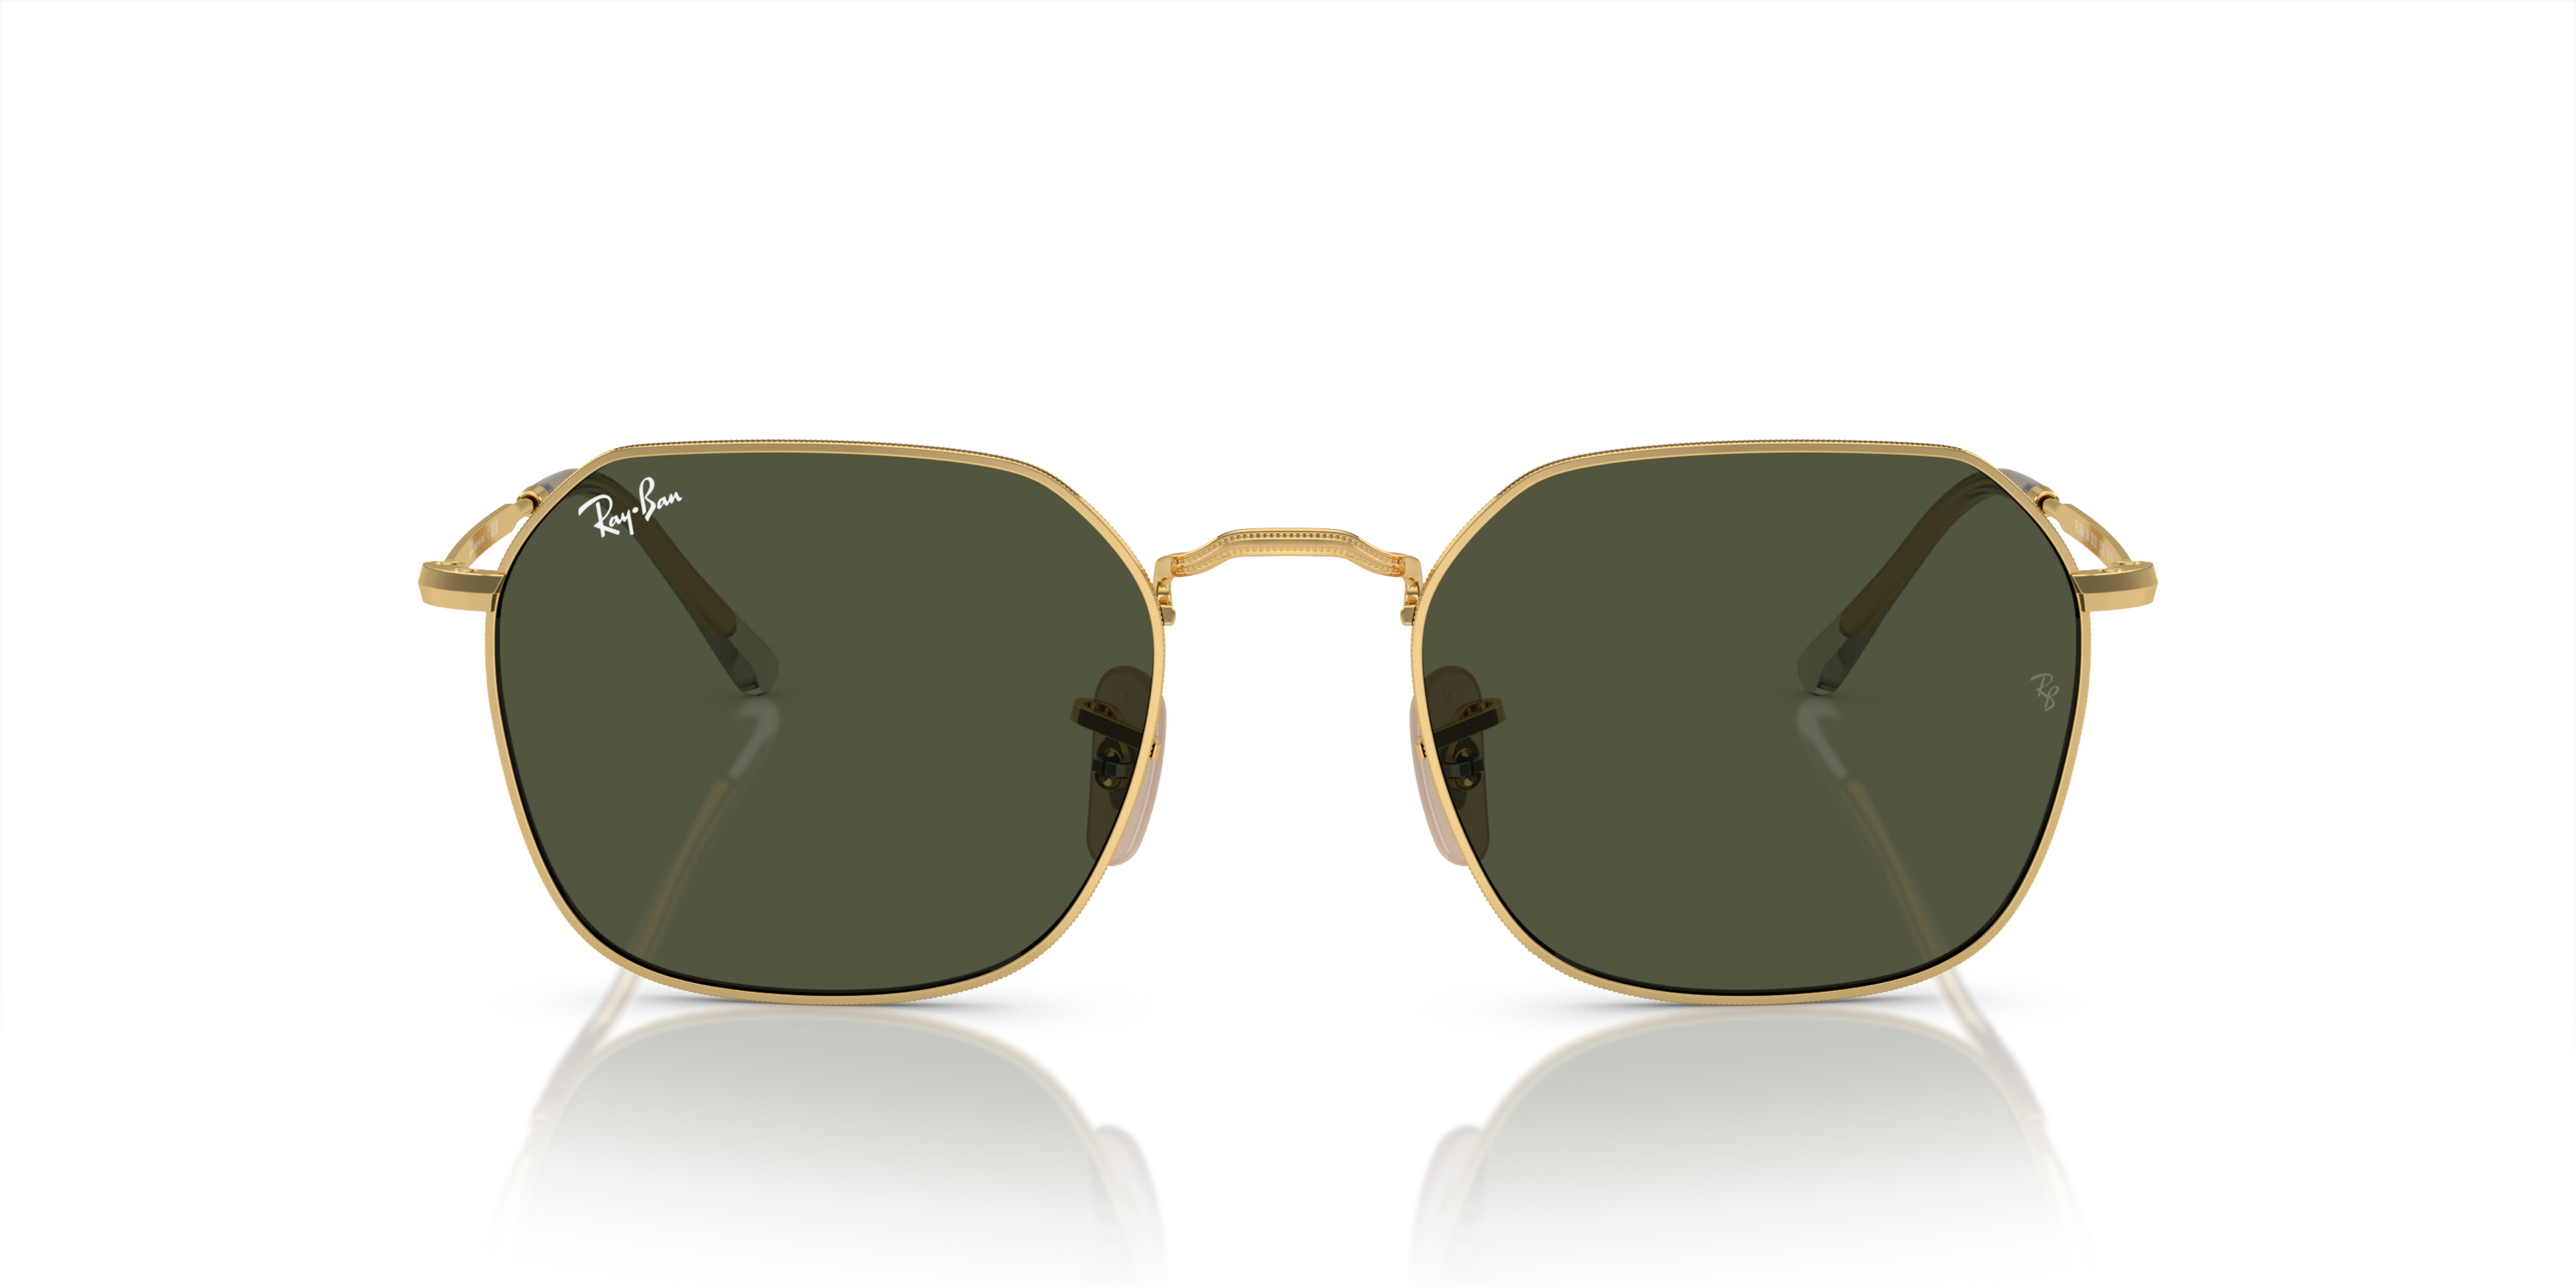 [products.image.front] Ray-Ban 0RB3694 001/31